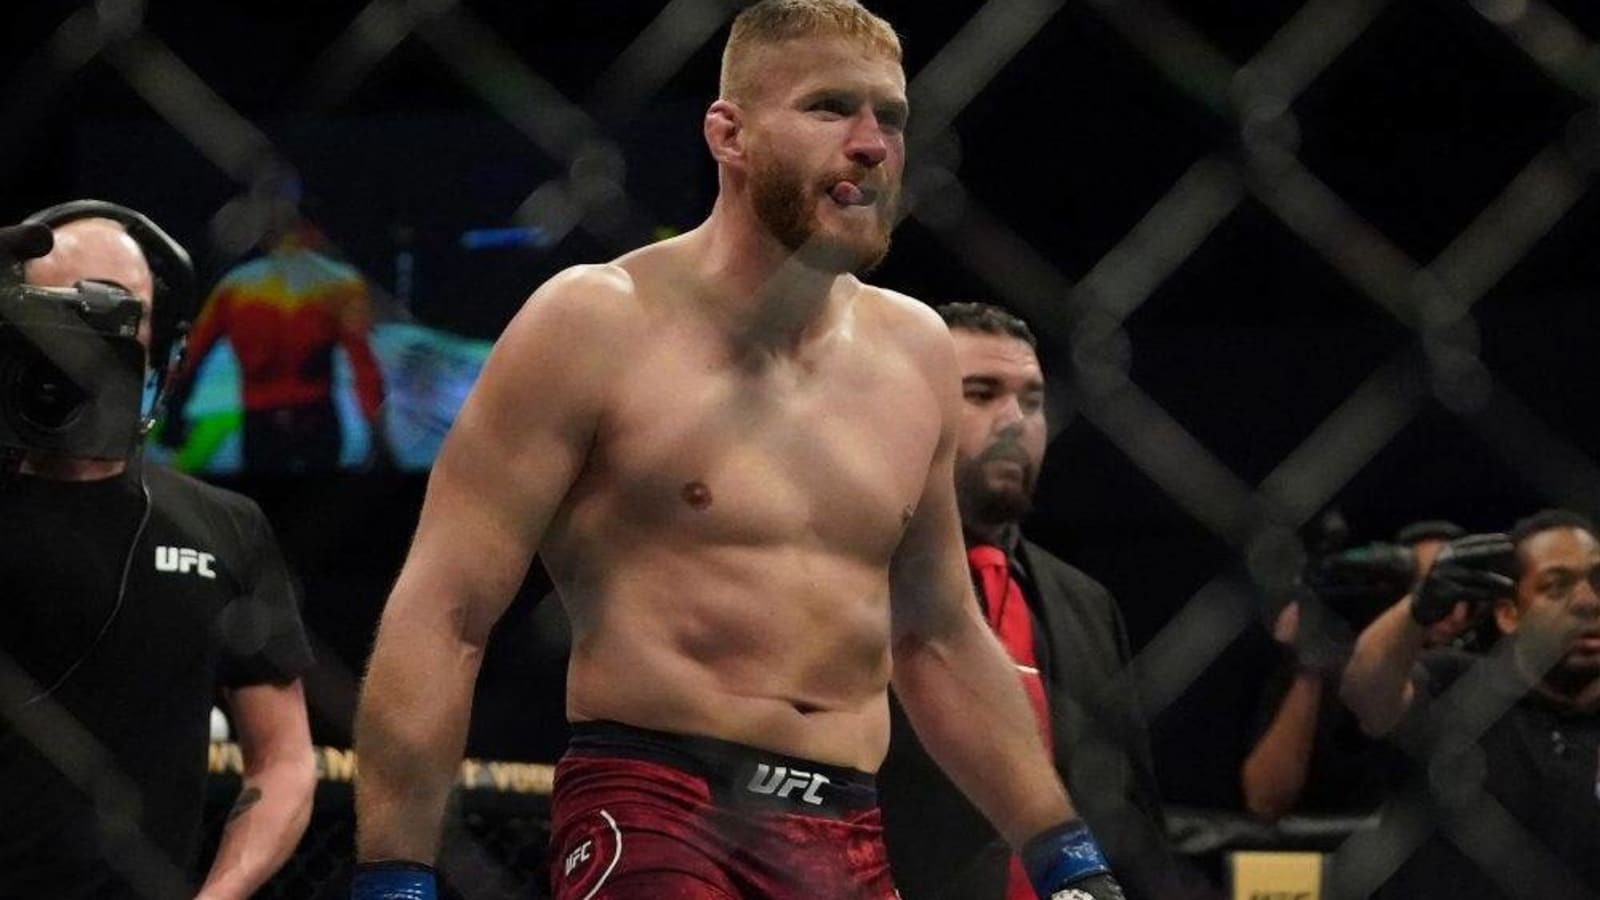 By The Numbers: Jan Blachowicz vs. Magomed Ankalaev